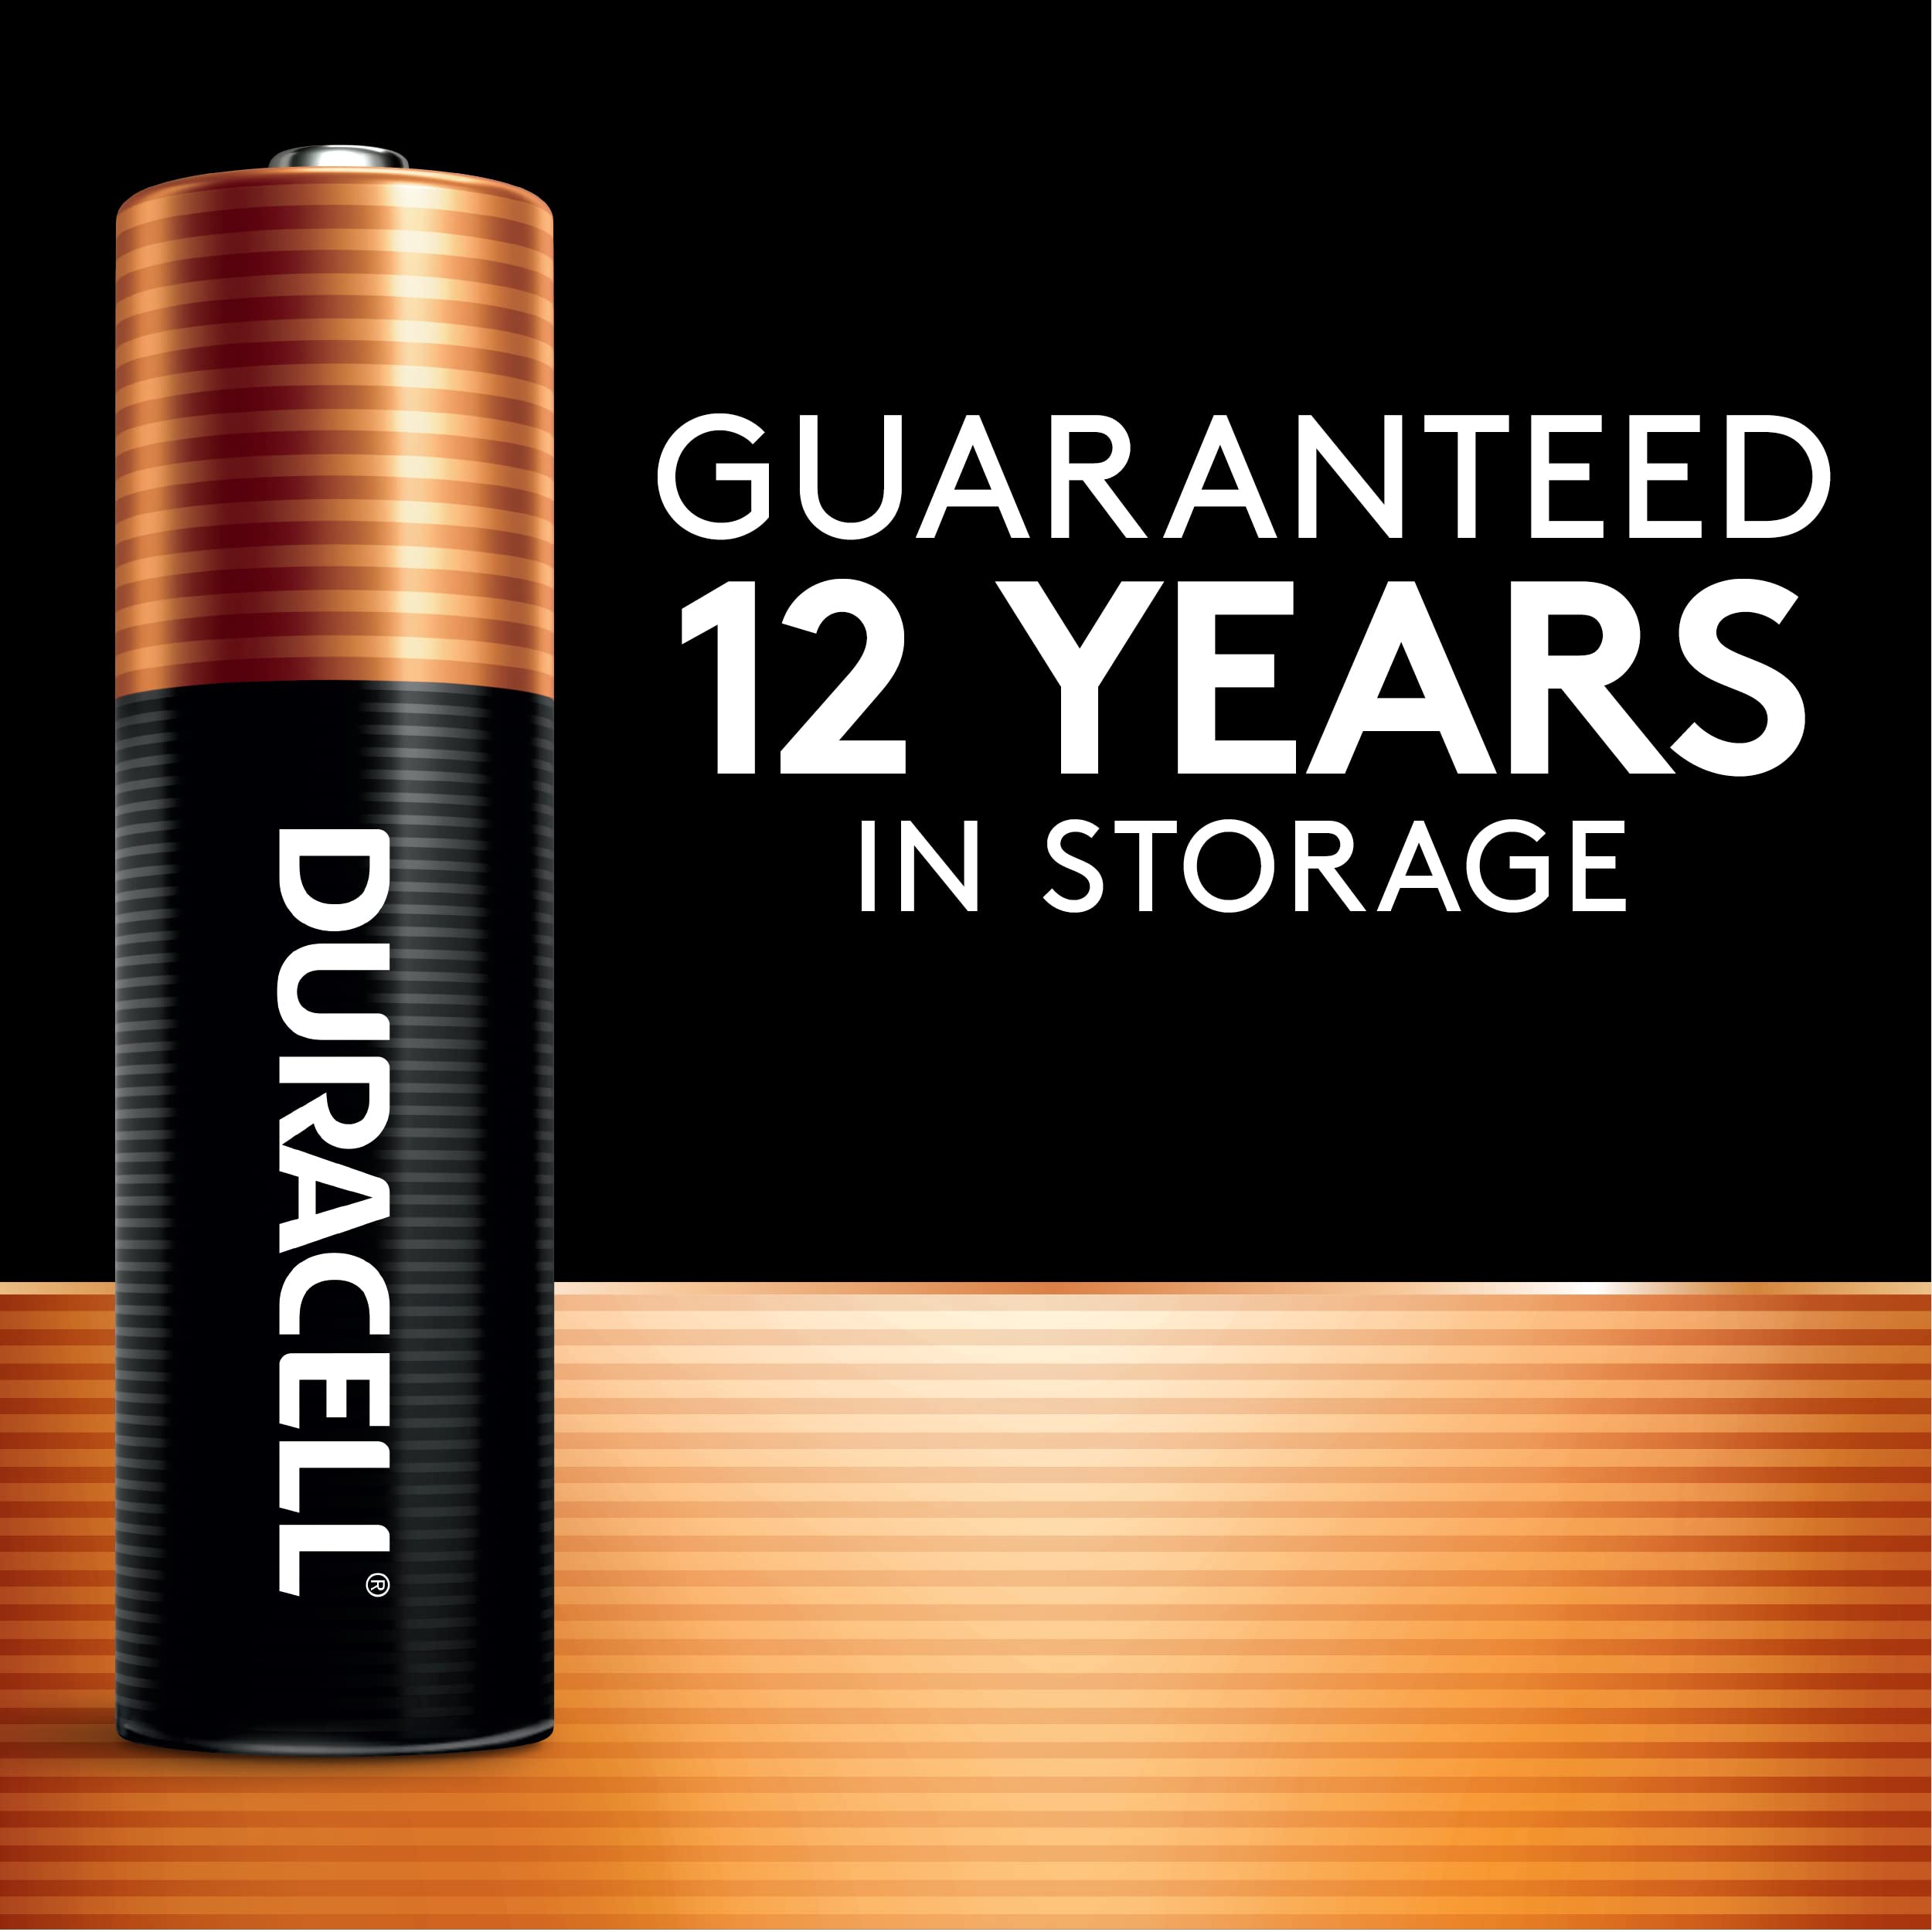 Duracell Coppertop AAA Batteries with Power Boost Ingredients, 12 Count Pack Triple A Battery with Long-lasting Power, Alkaline AAA Battery for Household and Office Devices